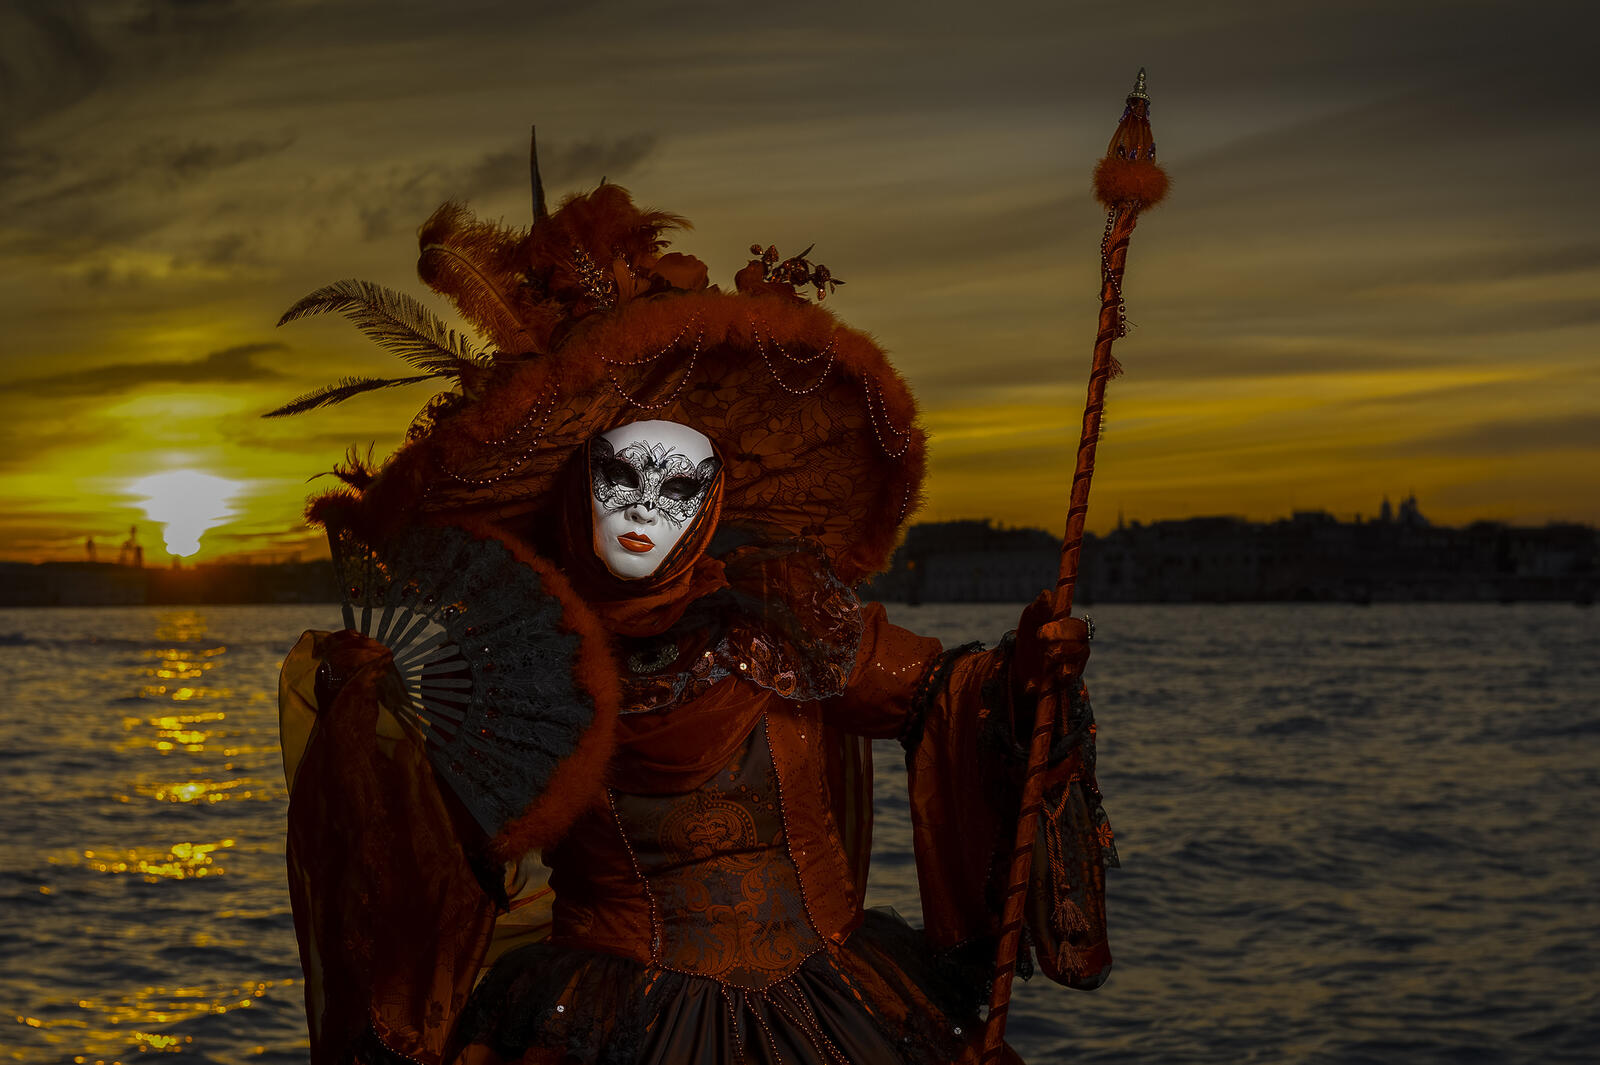 Wallpapers carnival in venice masks costumes on the desktop